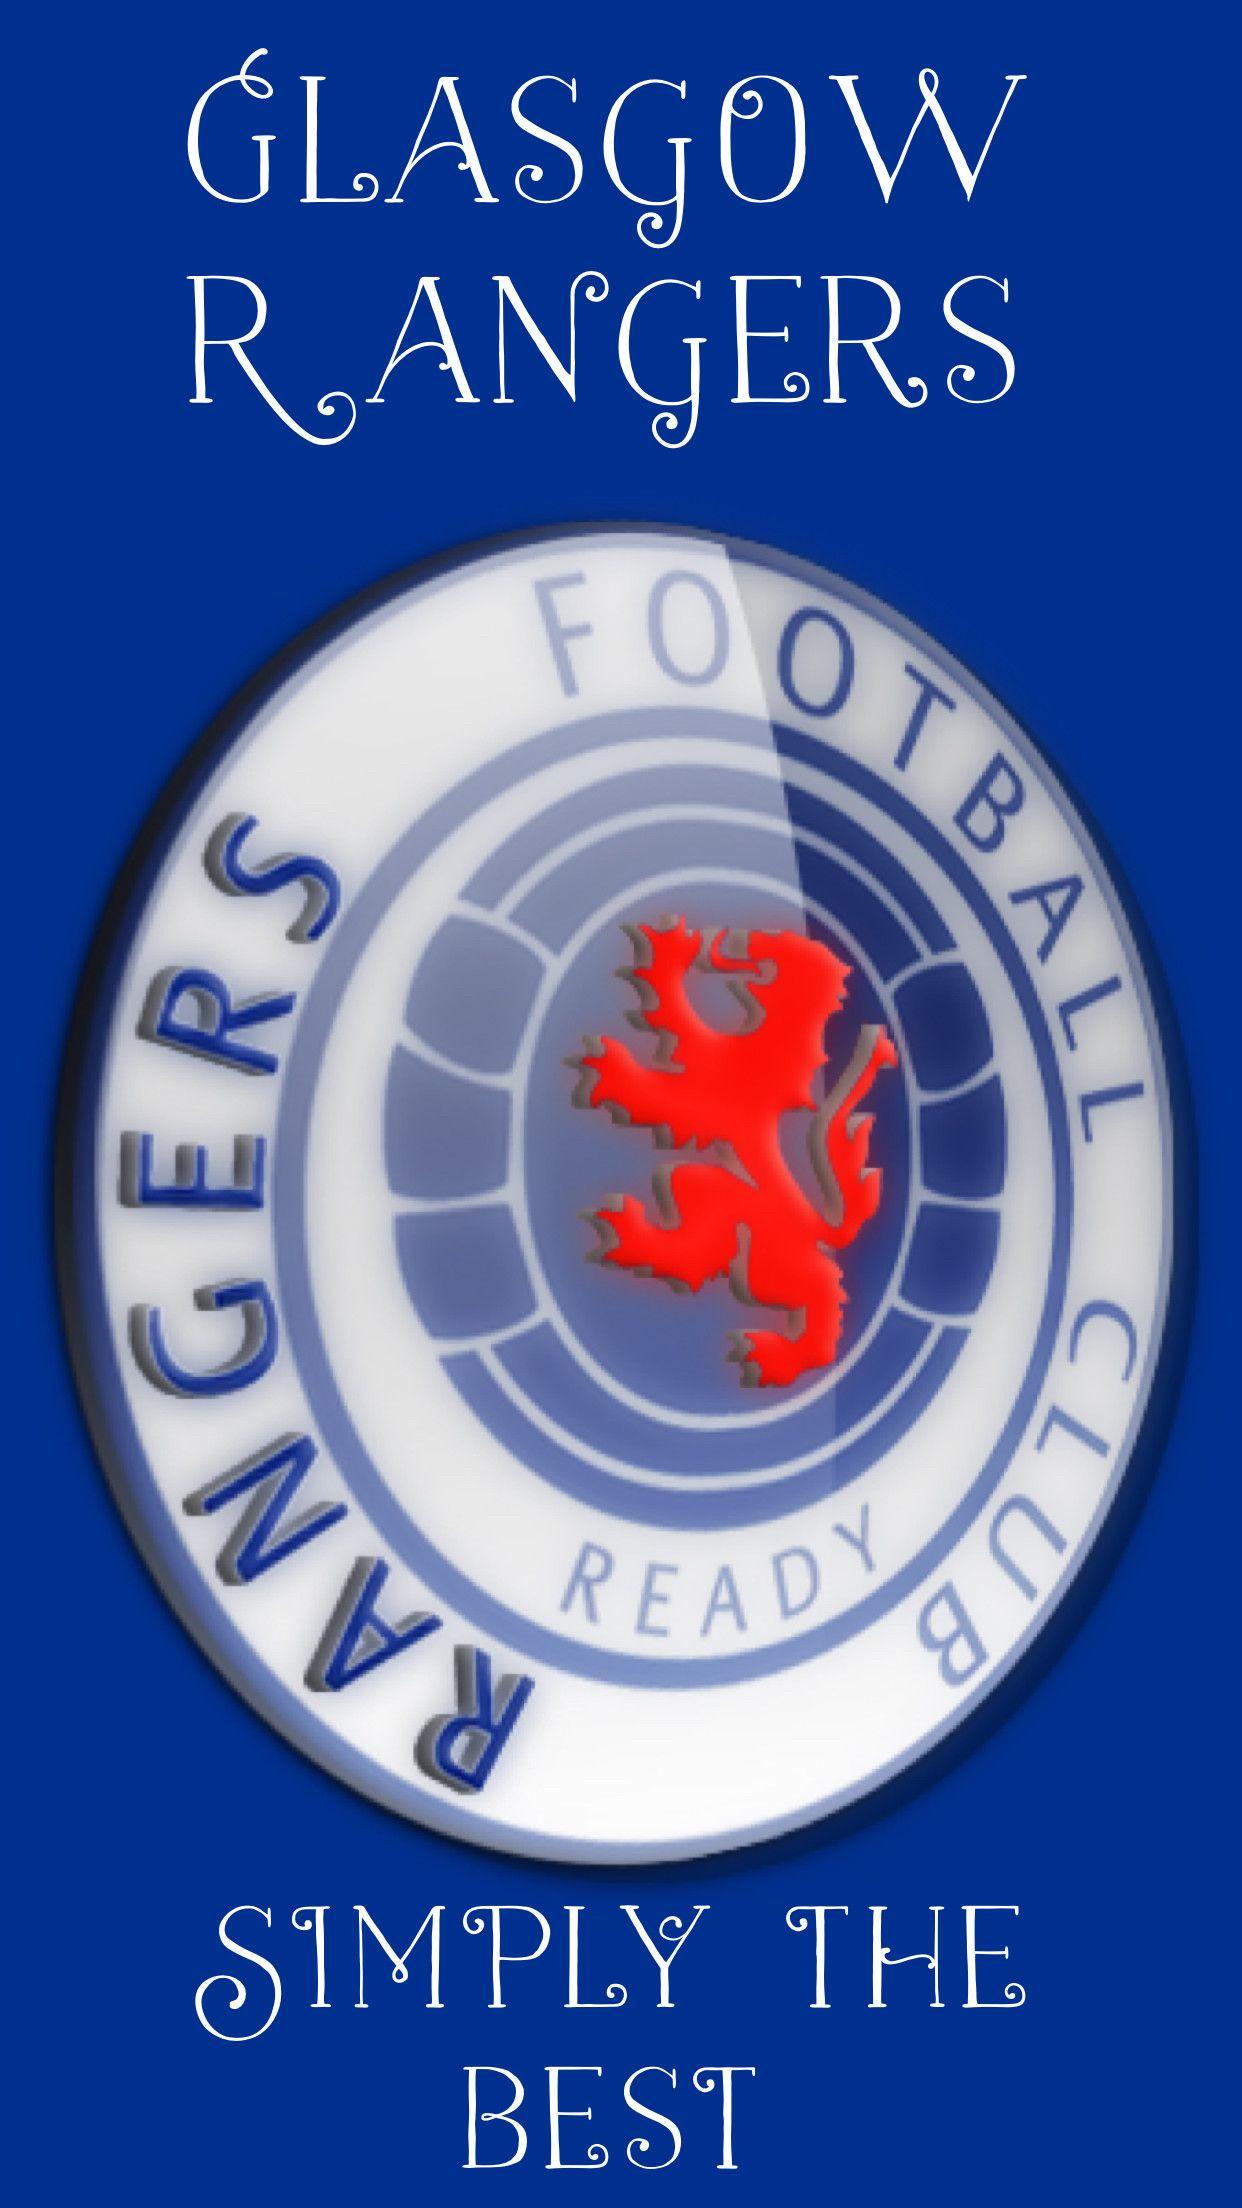 Glasgow Rangers Wallpapers Top Free Glasgow Rangers Backgrounds Wallpaperaccess